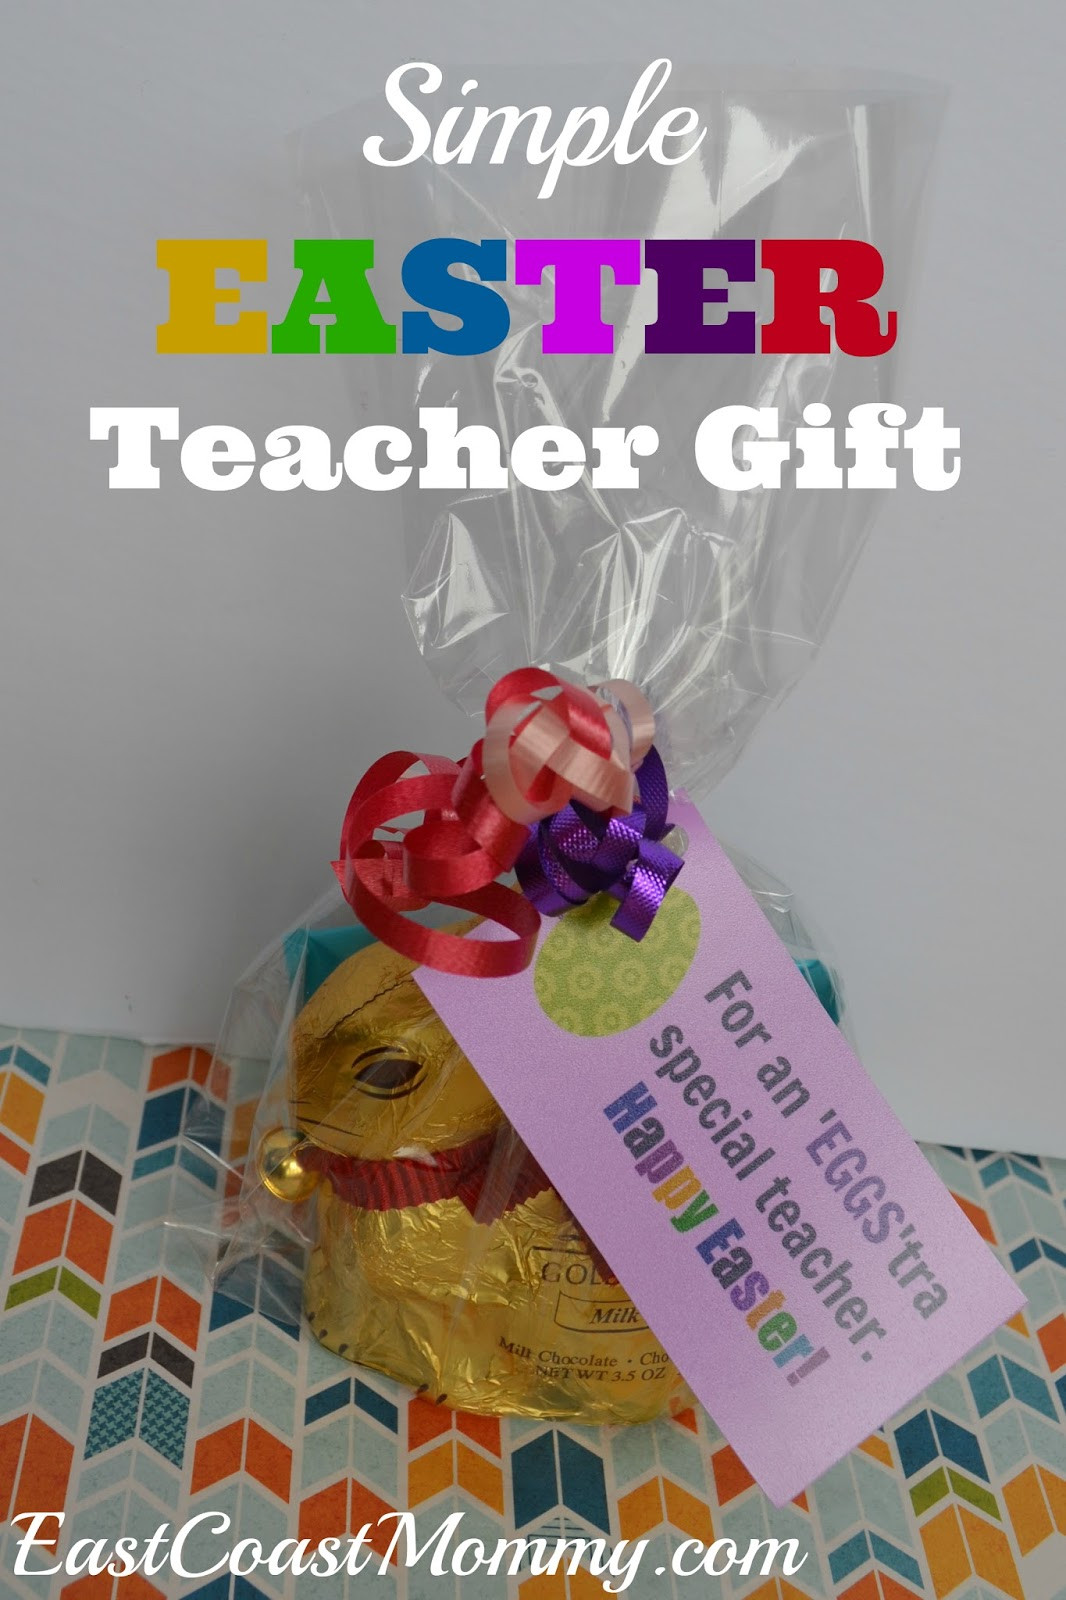 Best ideas about Easter Gift Ideas For Teachers
. Save or Pin East Coast Mommy Simple Easter Teacher Gift with free Now.